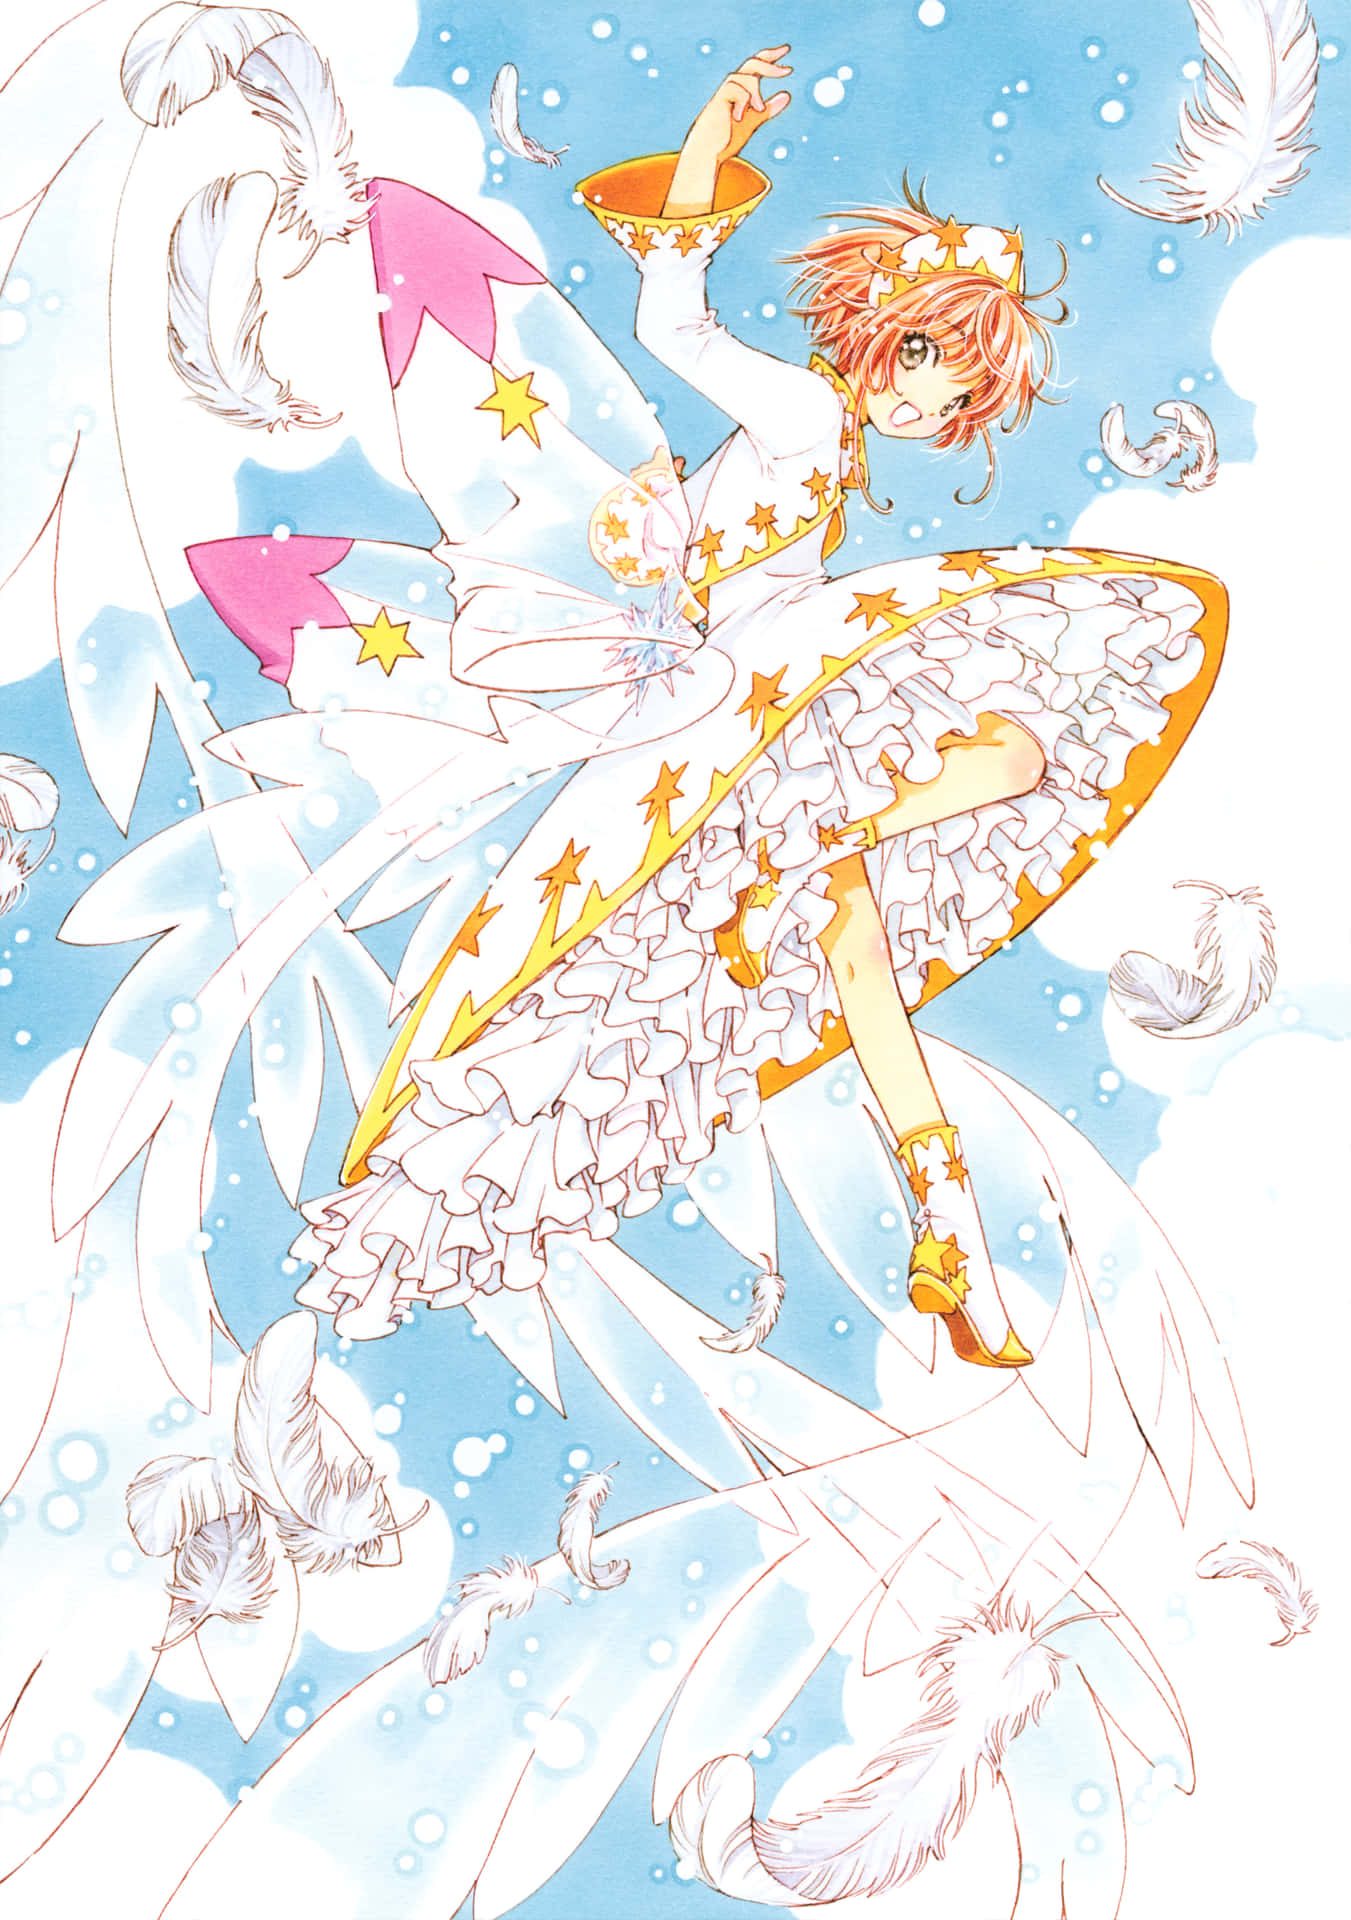 "Be brave and set your dreams free with Cardcaptor Sakura!"